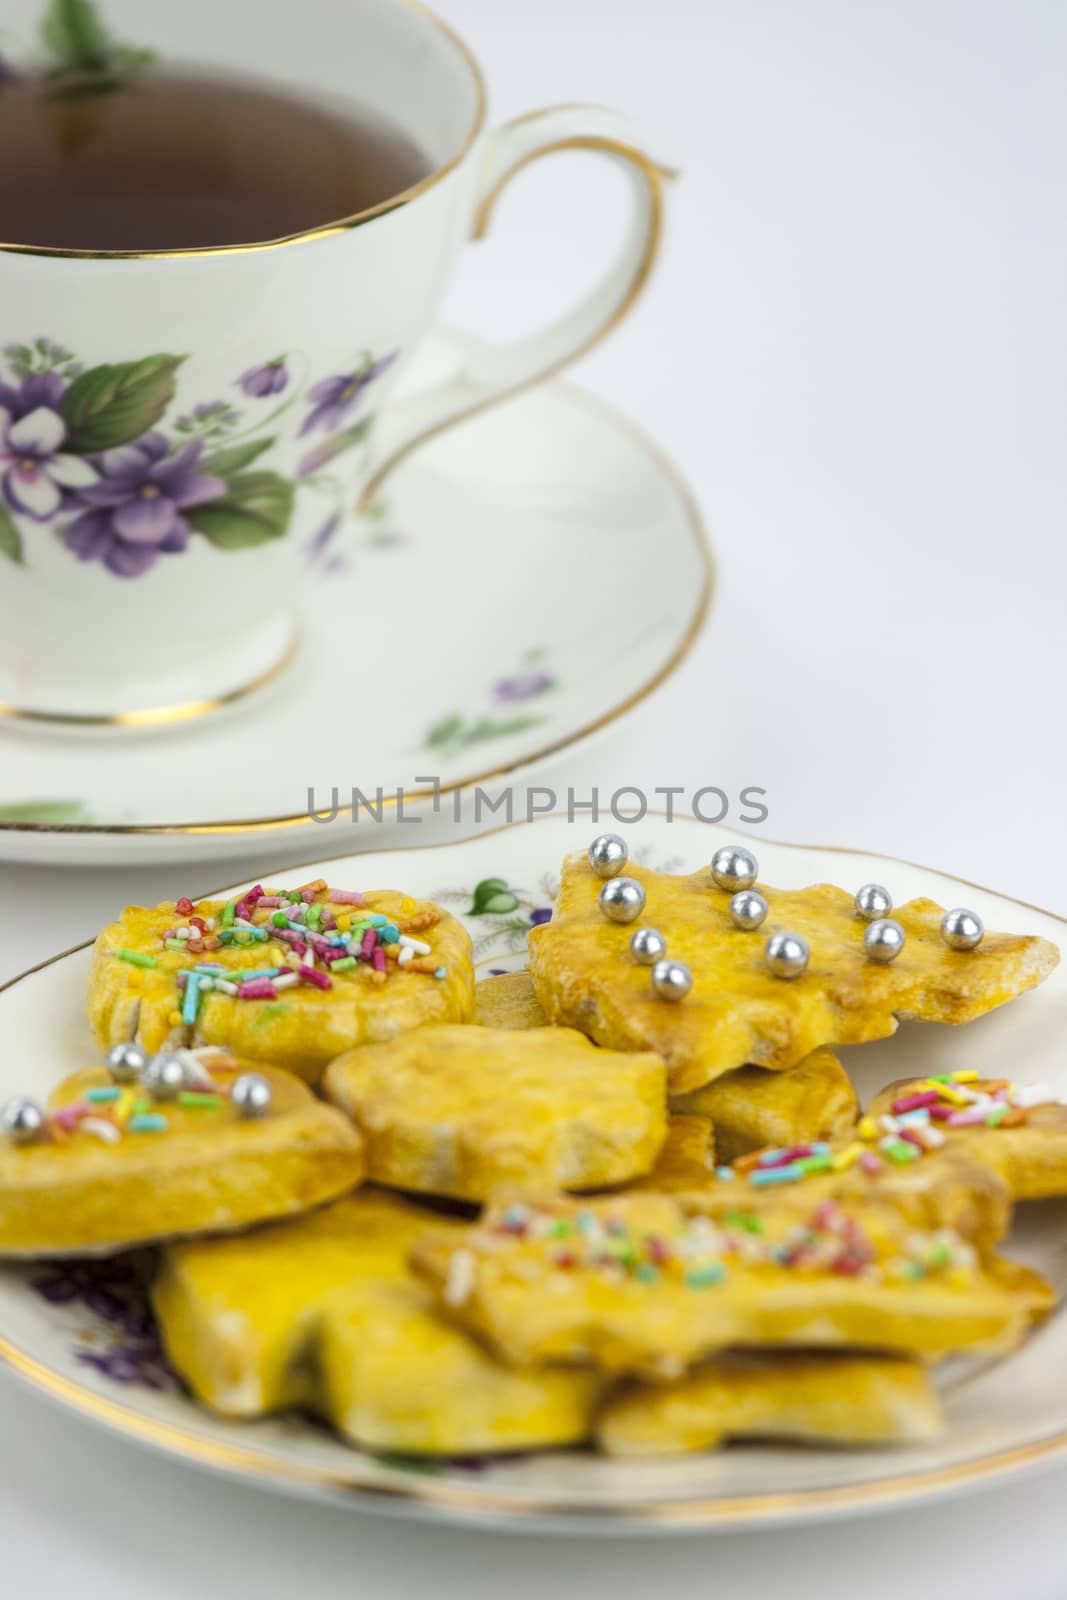 Cup of english tea whit sweet and decored cookies